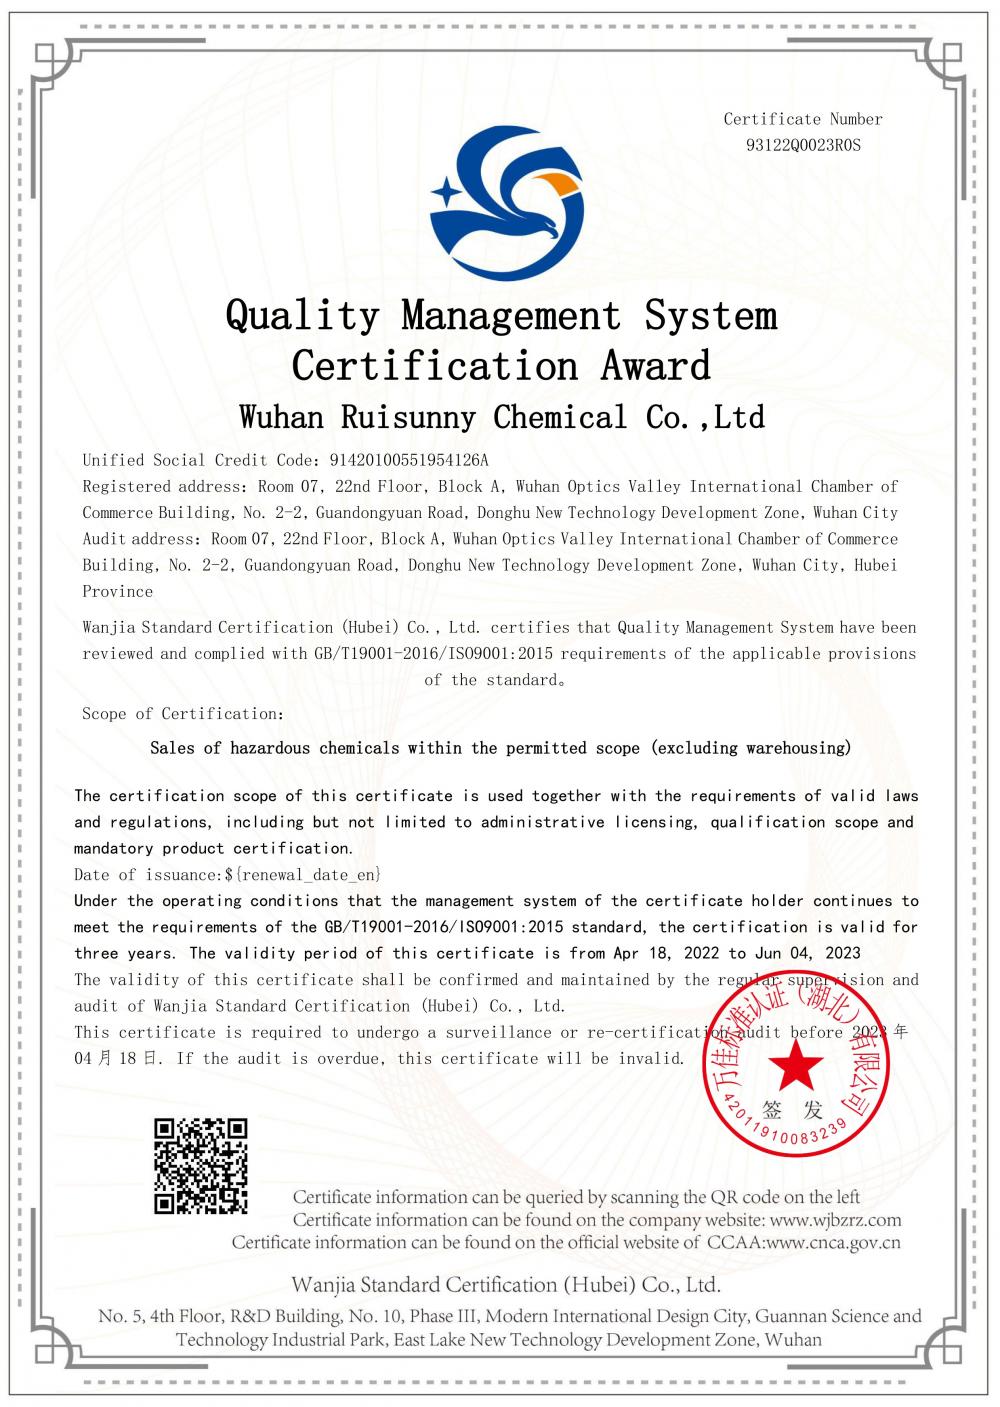 Quality Management System Certification Award